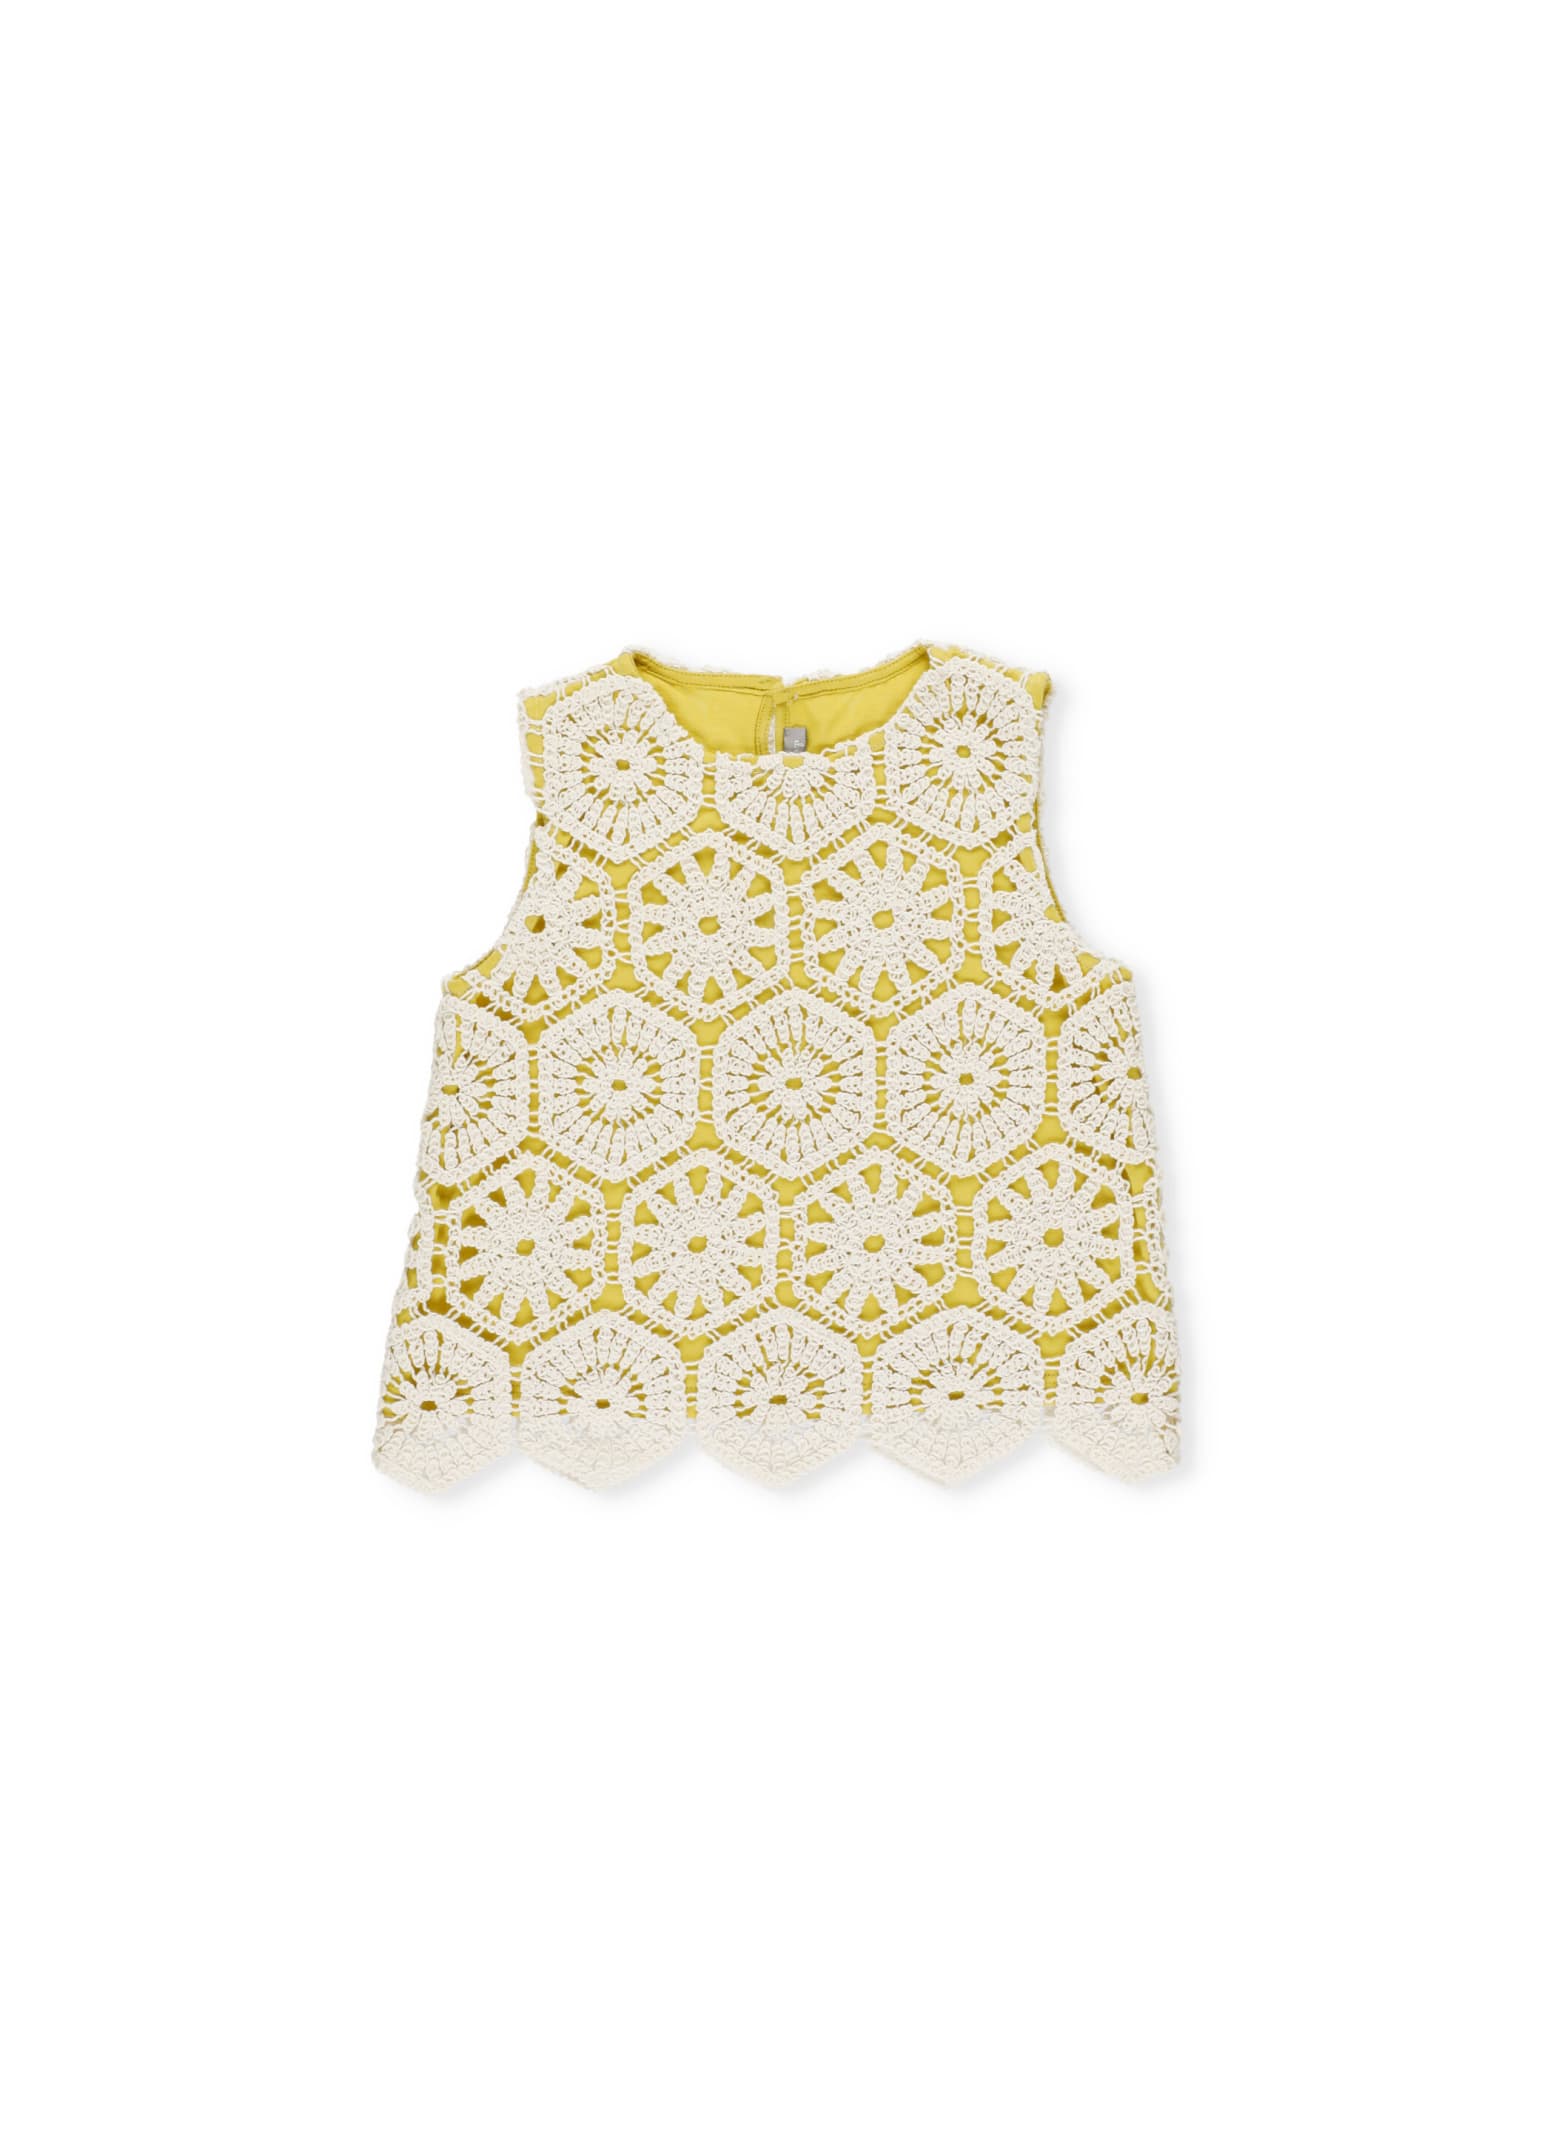 Il Gufo Crochet Effect Top Lined In Contrasting Color